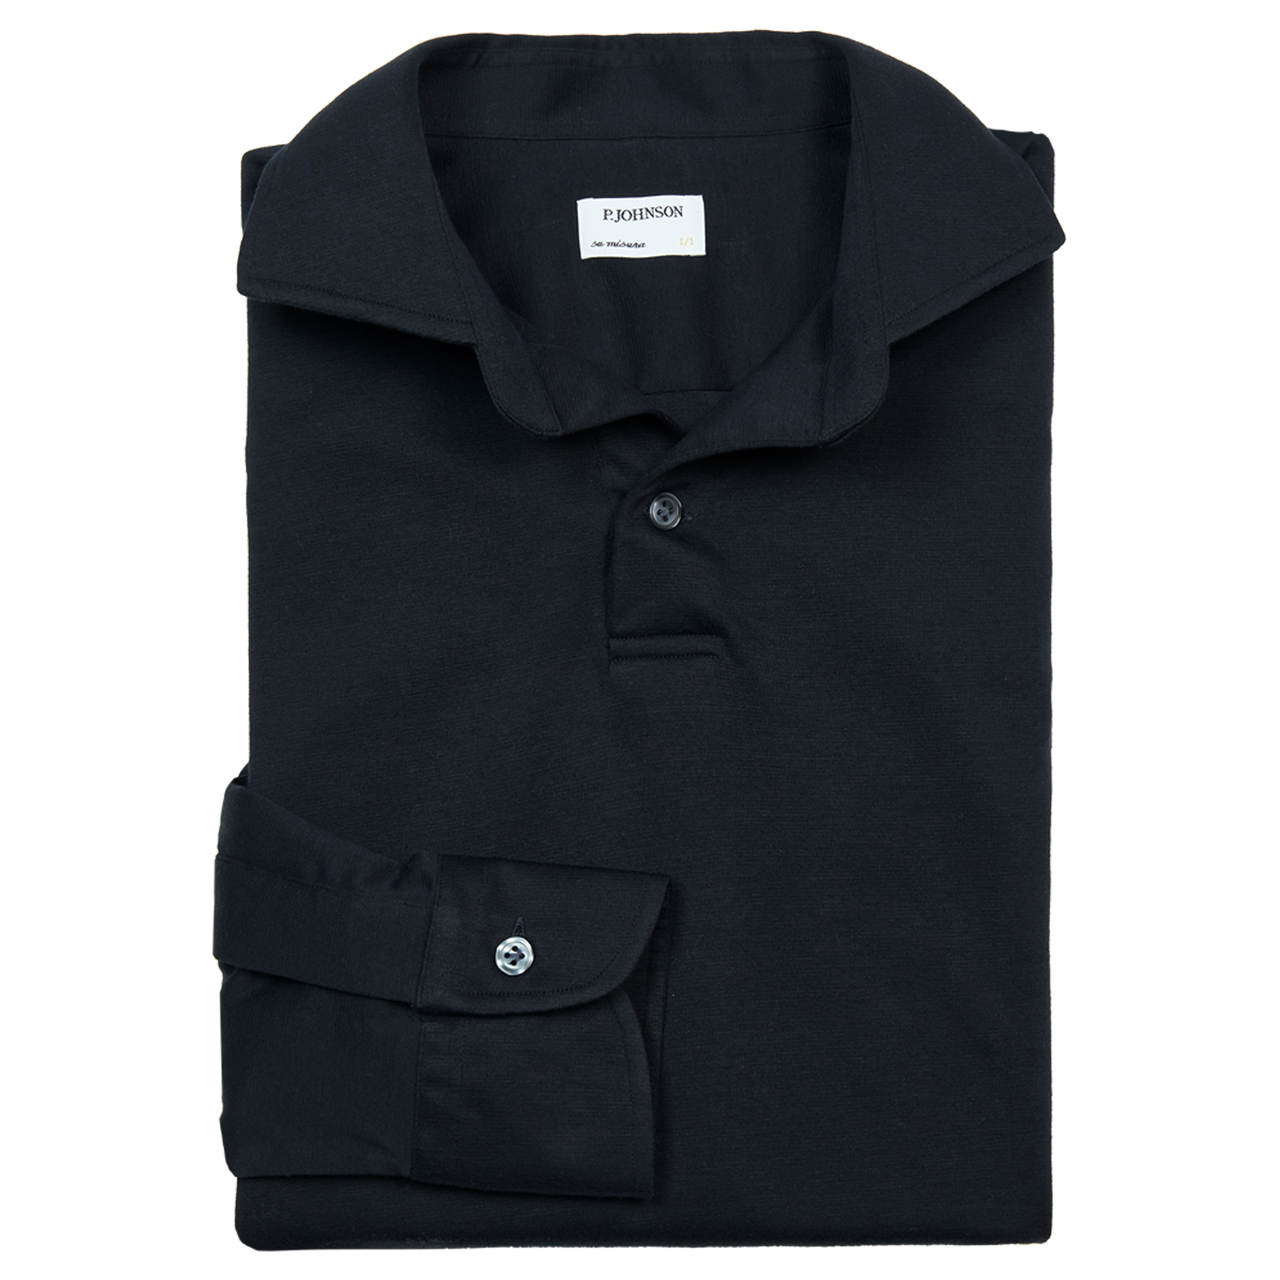 P. Johnson Polo in Navy Cotton Ponti with Cutaway Collar